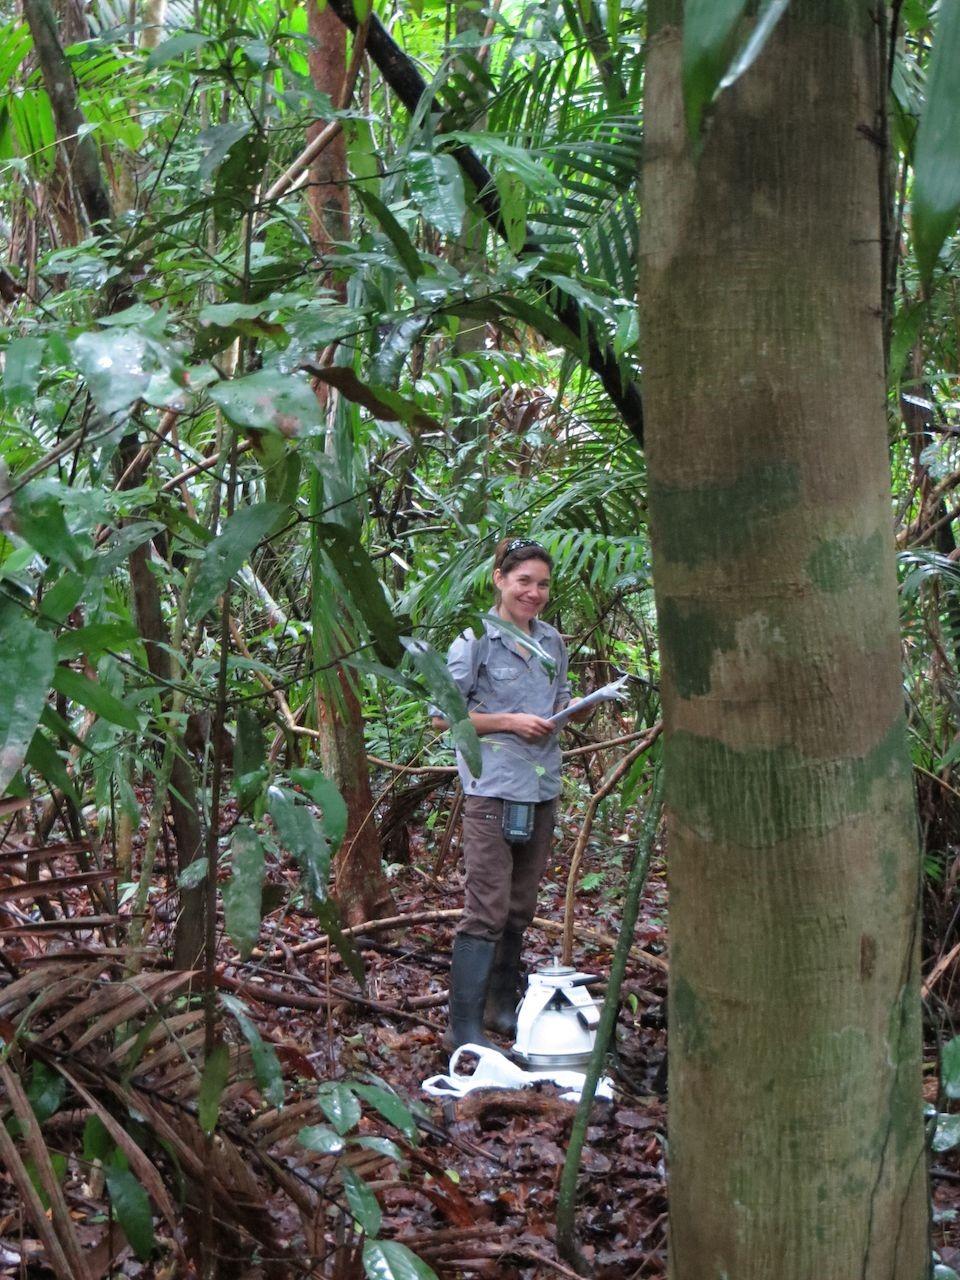 Dr Laëtitia Bréchet takes measurements of soil respiration at the field sites in lowland tropical forest in Panama.